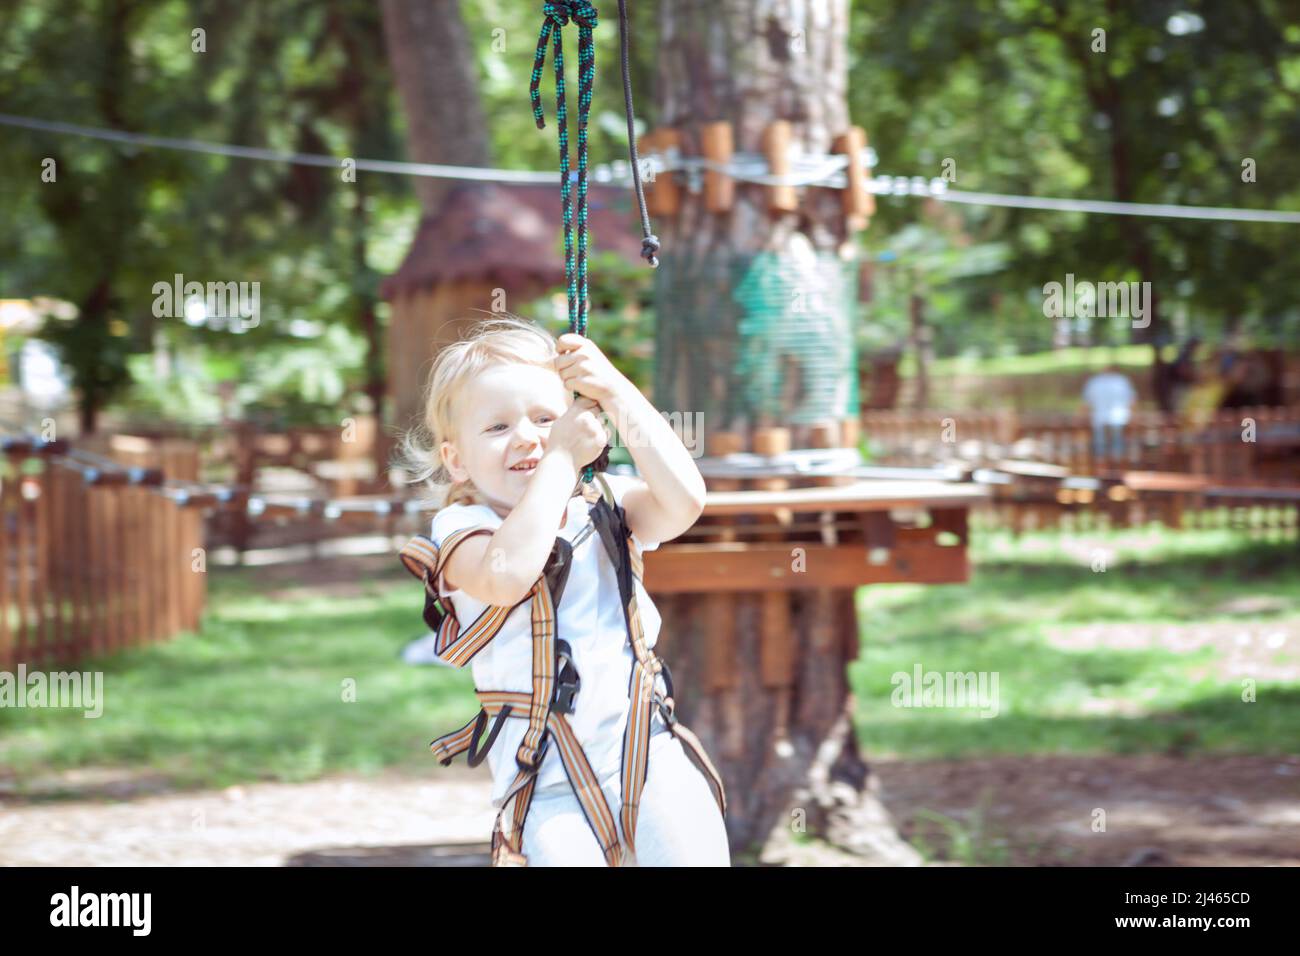 Leisure activity. Little girl on a carbine crosses the rope in an extreme rope park. Stock Photo